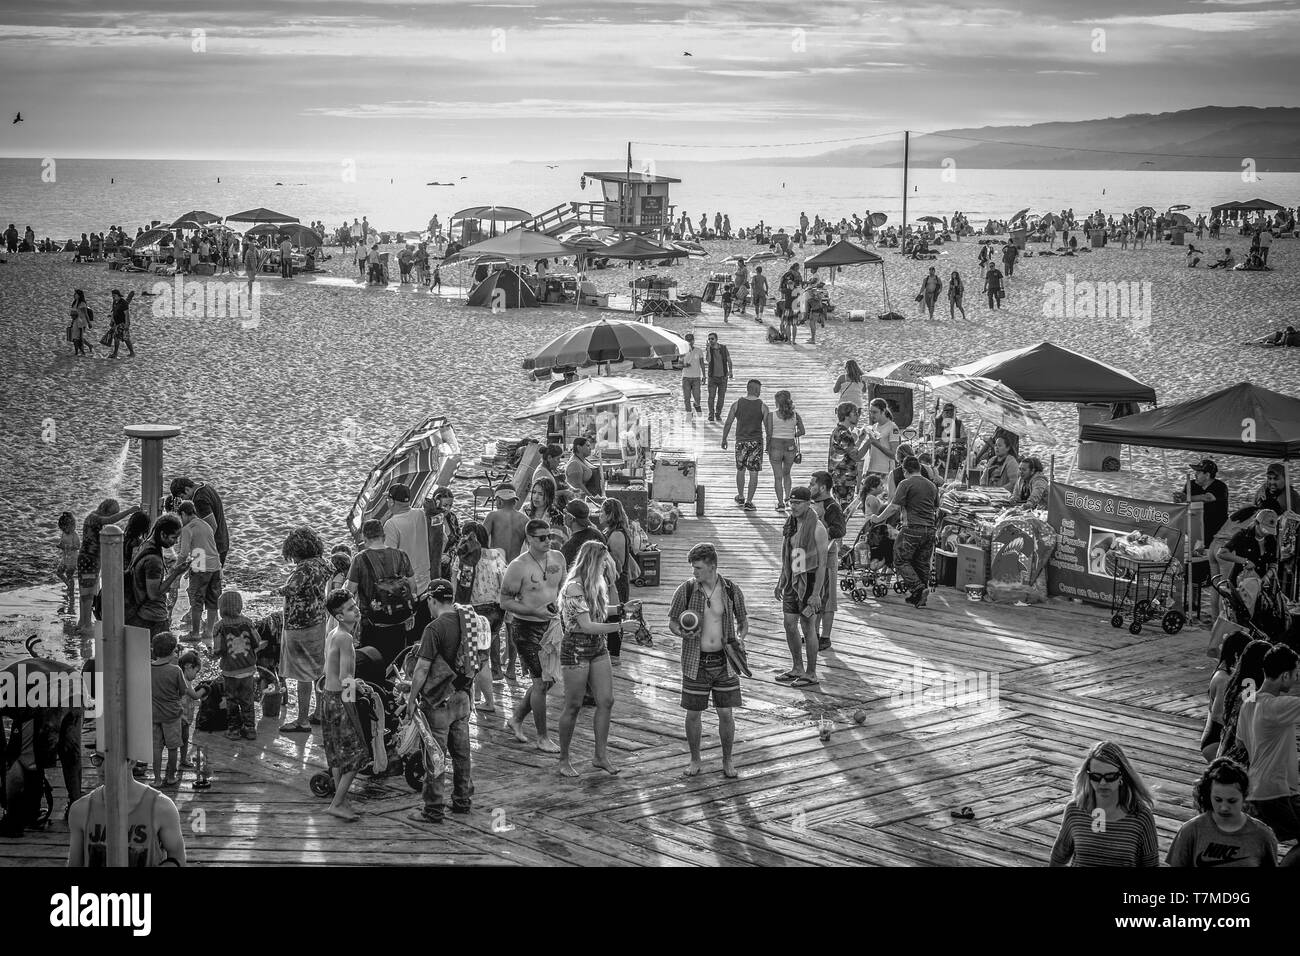 Santa Monica Beach is a busy place in summer - LOS ANGELES, UNITED STATES OF AMERICA - MARCH 29, 2019 Stock Photo